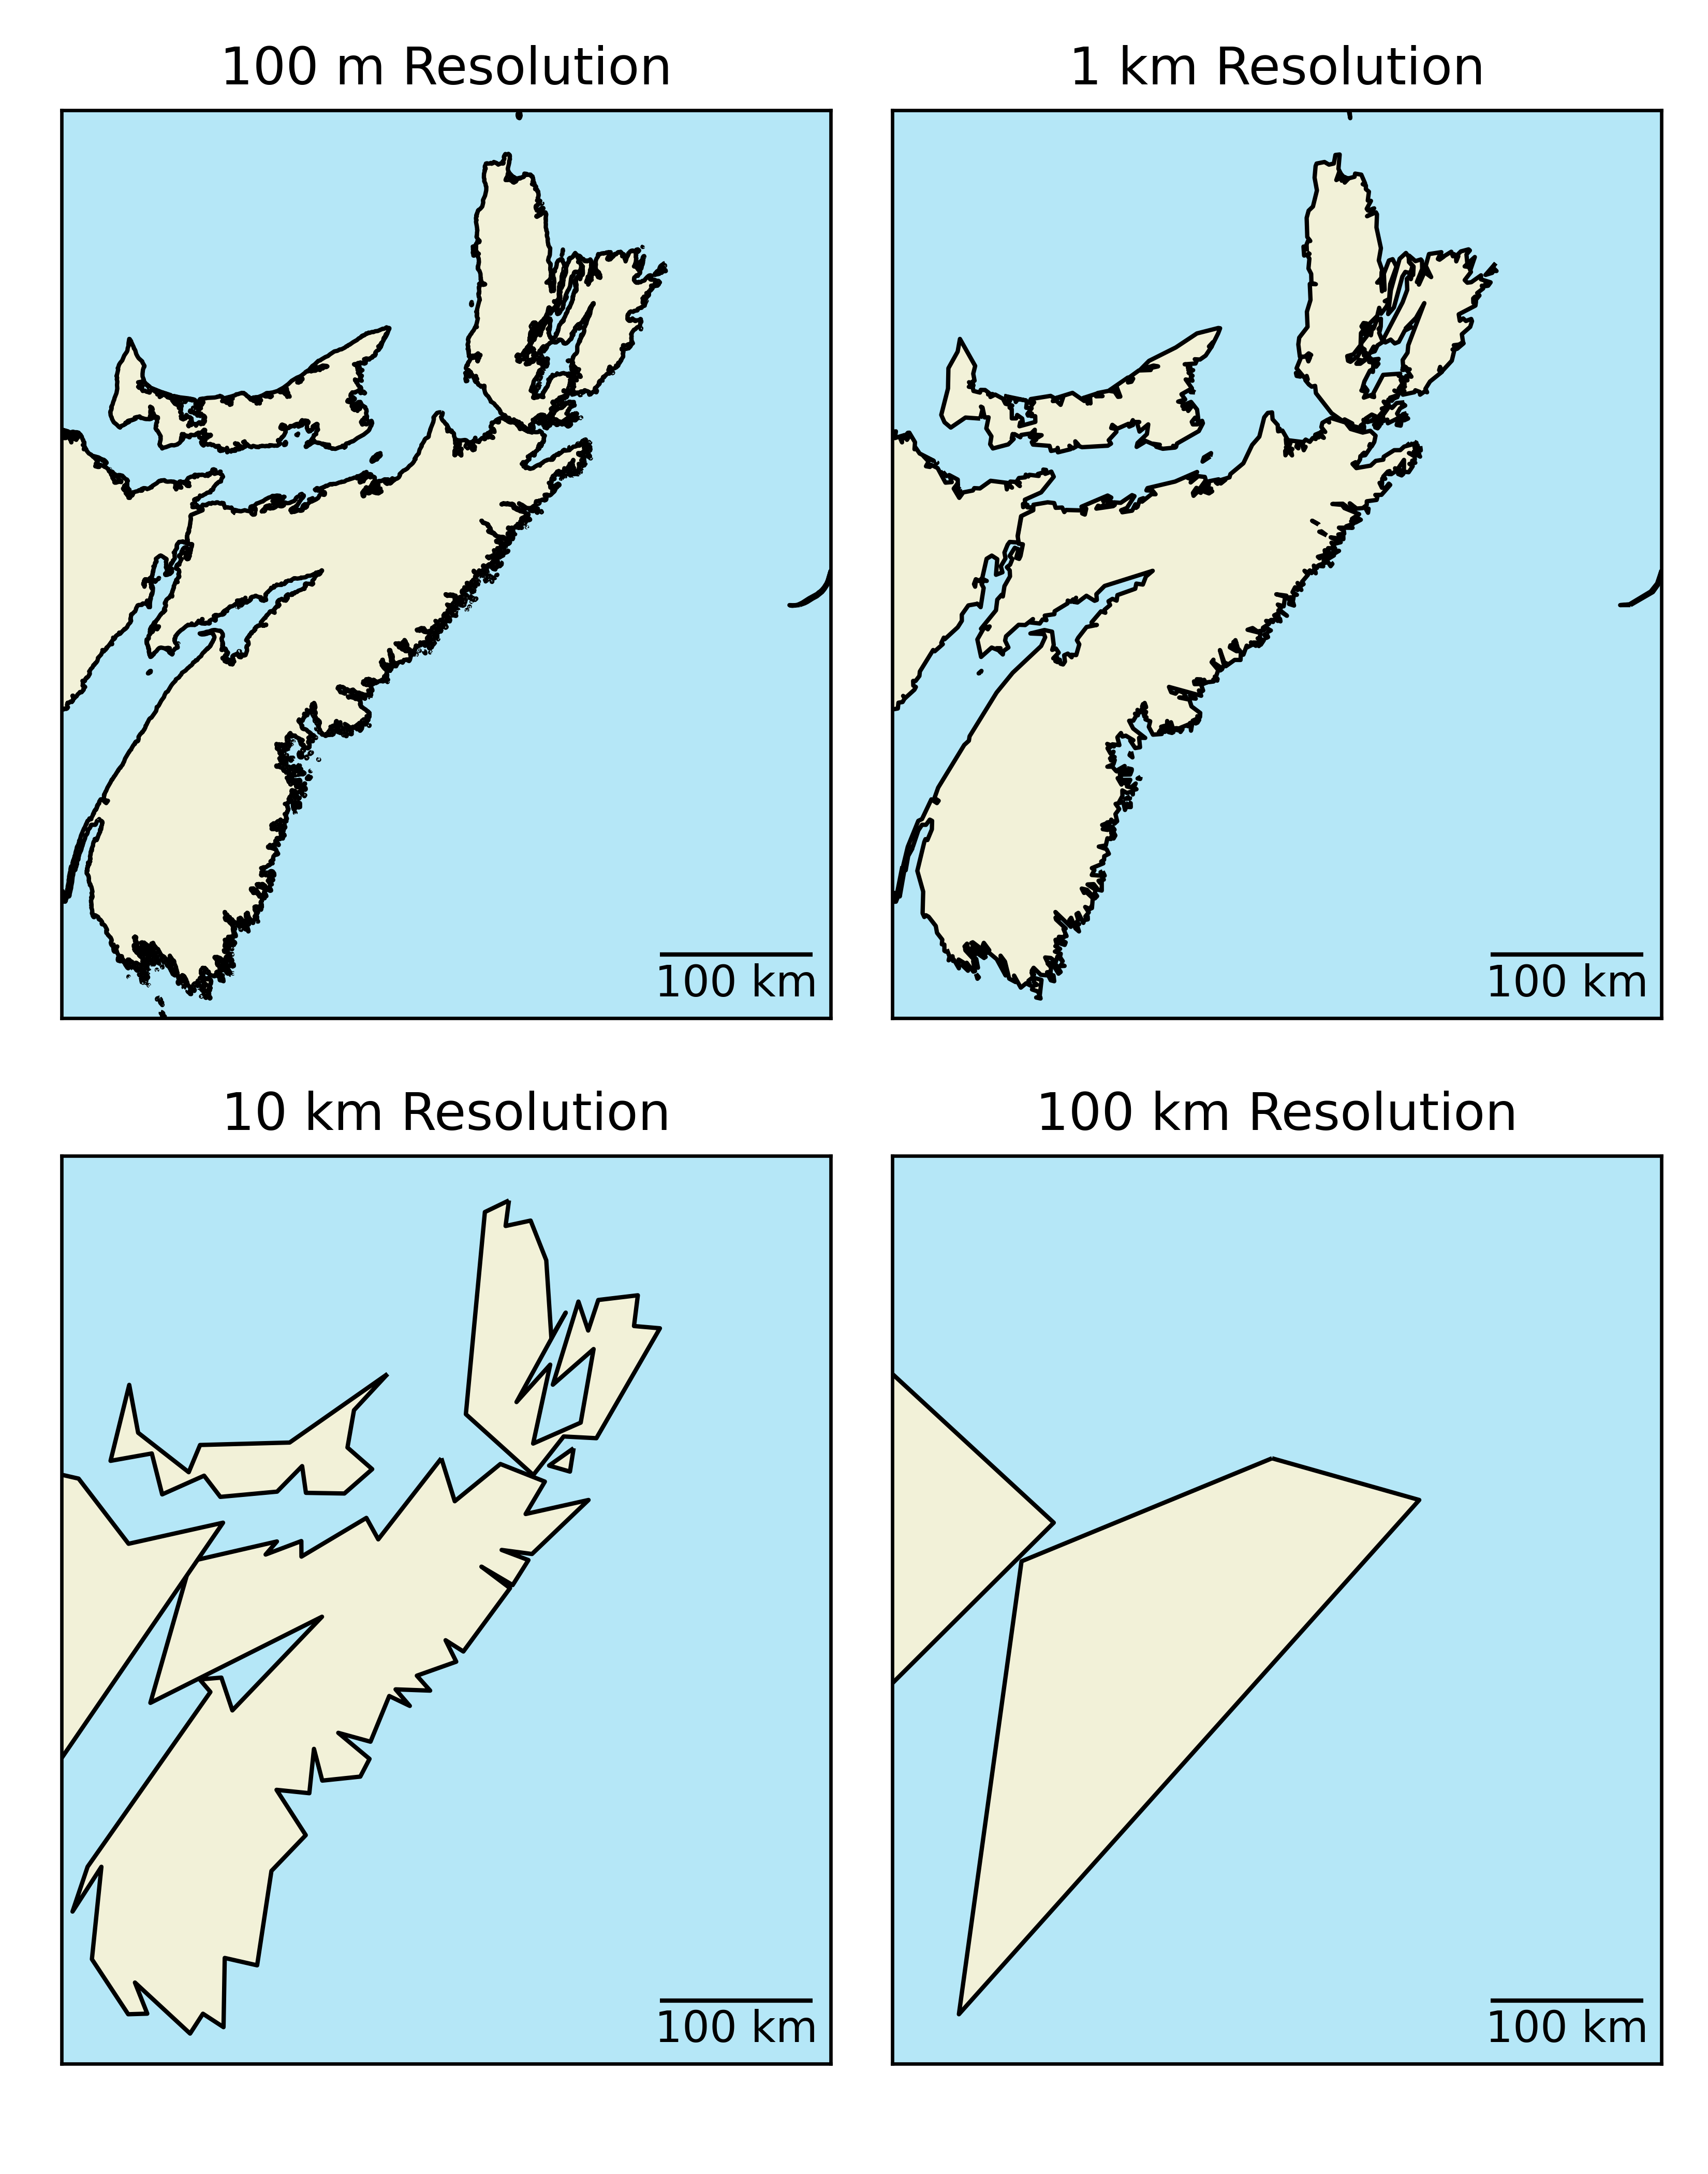 Vector image of Nova Scotia at different resolutions.  Here the original polygon (top left) has been downsampled to lower resolutions, by setting the minimum allowable distance between verticies.  As the distance beween vercicies increases, the resolution decreases and the coastline becomes less distinguishable. Skeeter, CC-BY-SA-4.0.